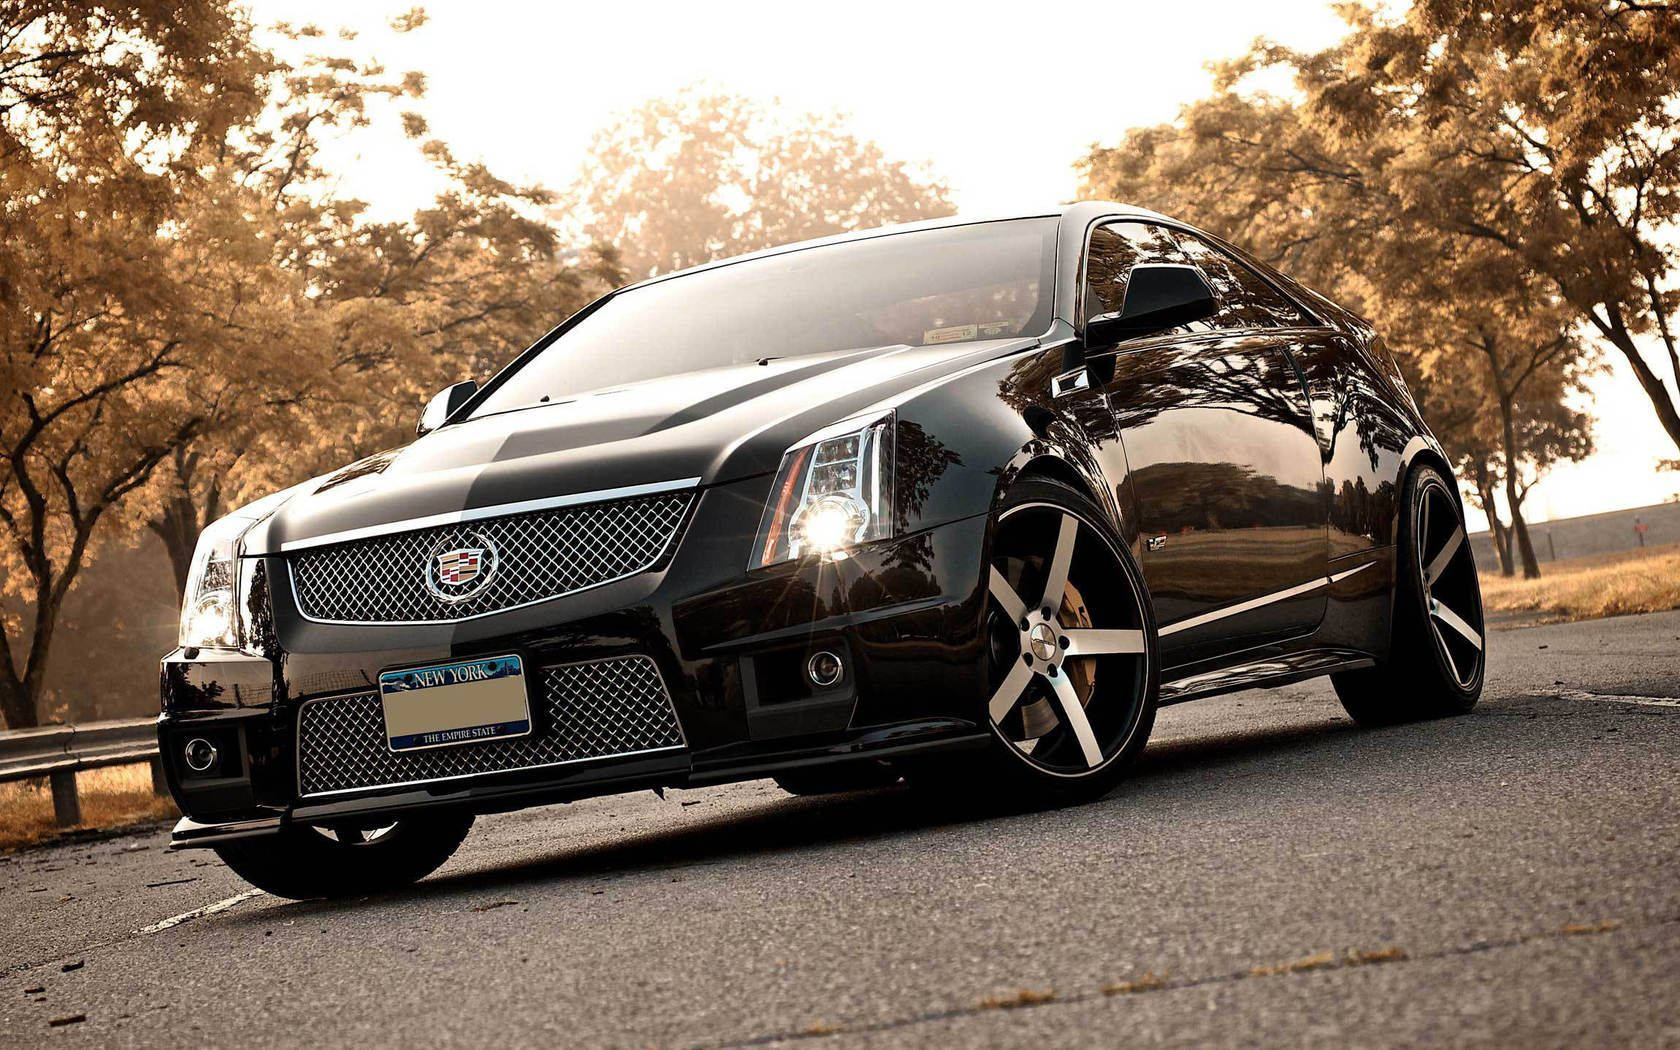 Black Cadillac Coupe Outdoors